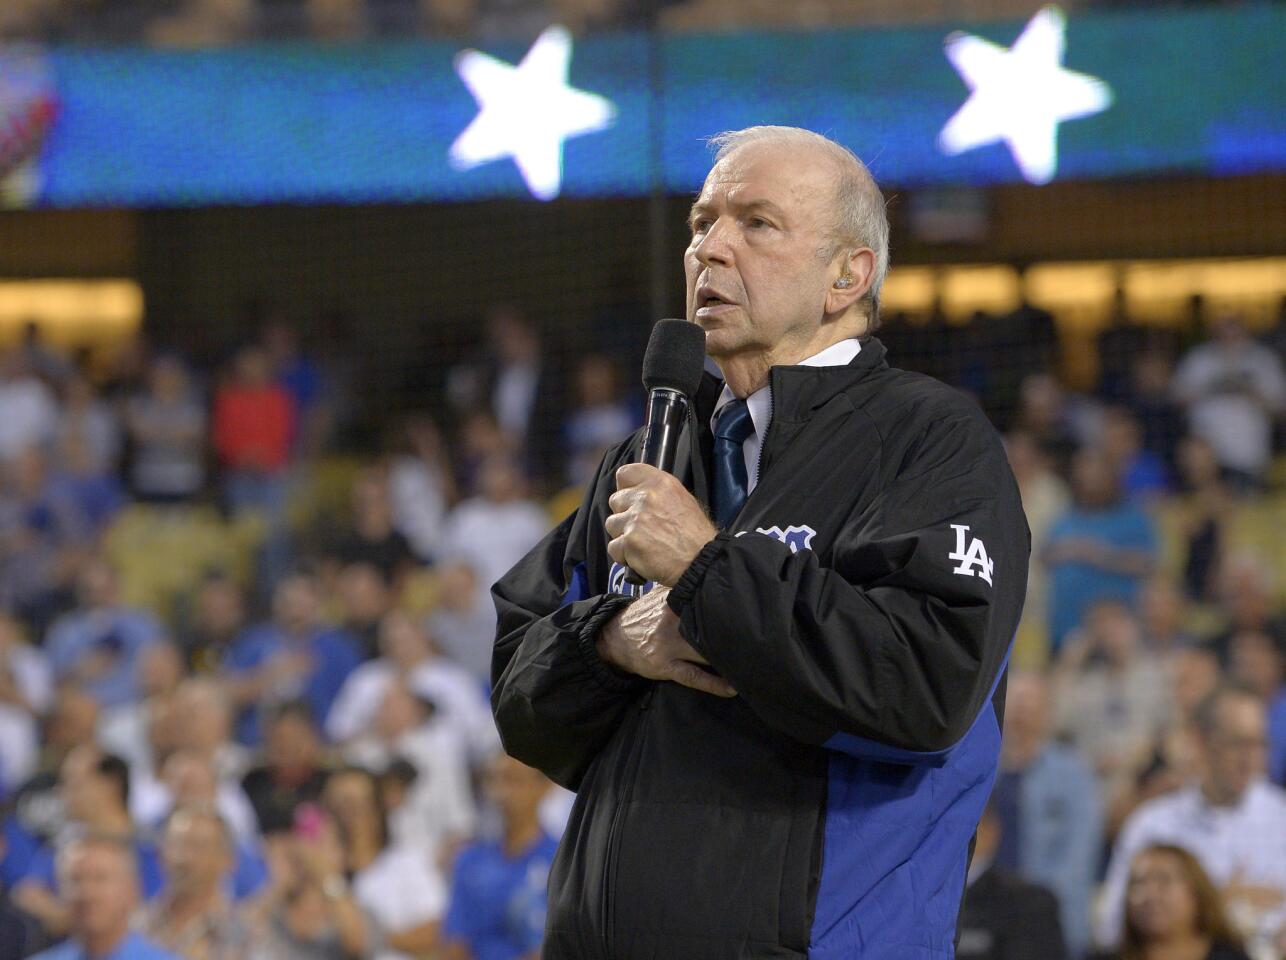 Frank Sinatra Jr. sings the national anthem before a 2015 game between the Dodgers and the Pittsburgh Pirates in Los Angeles.